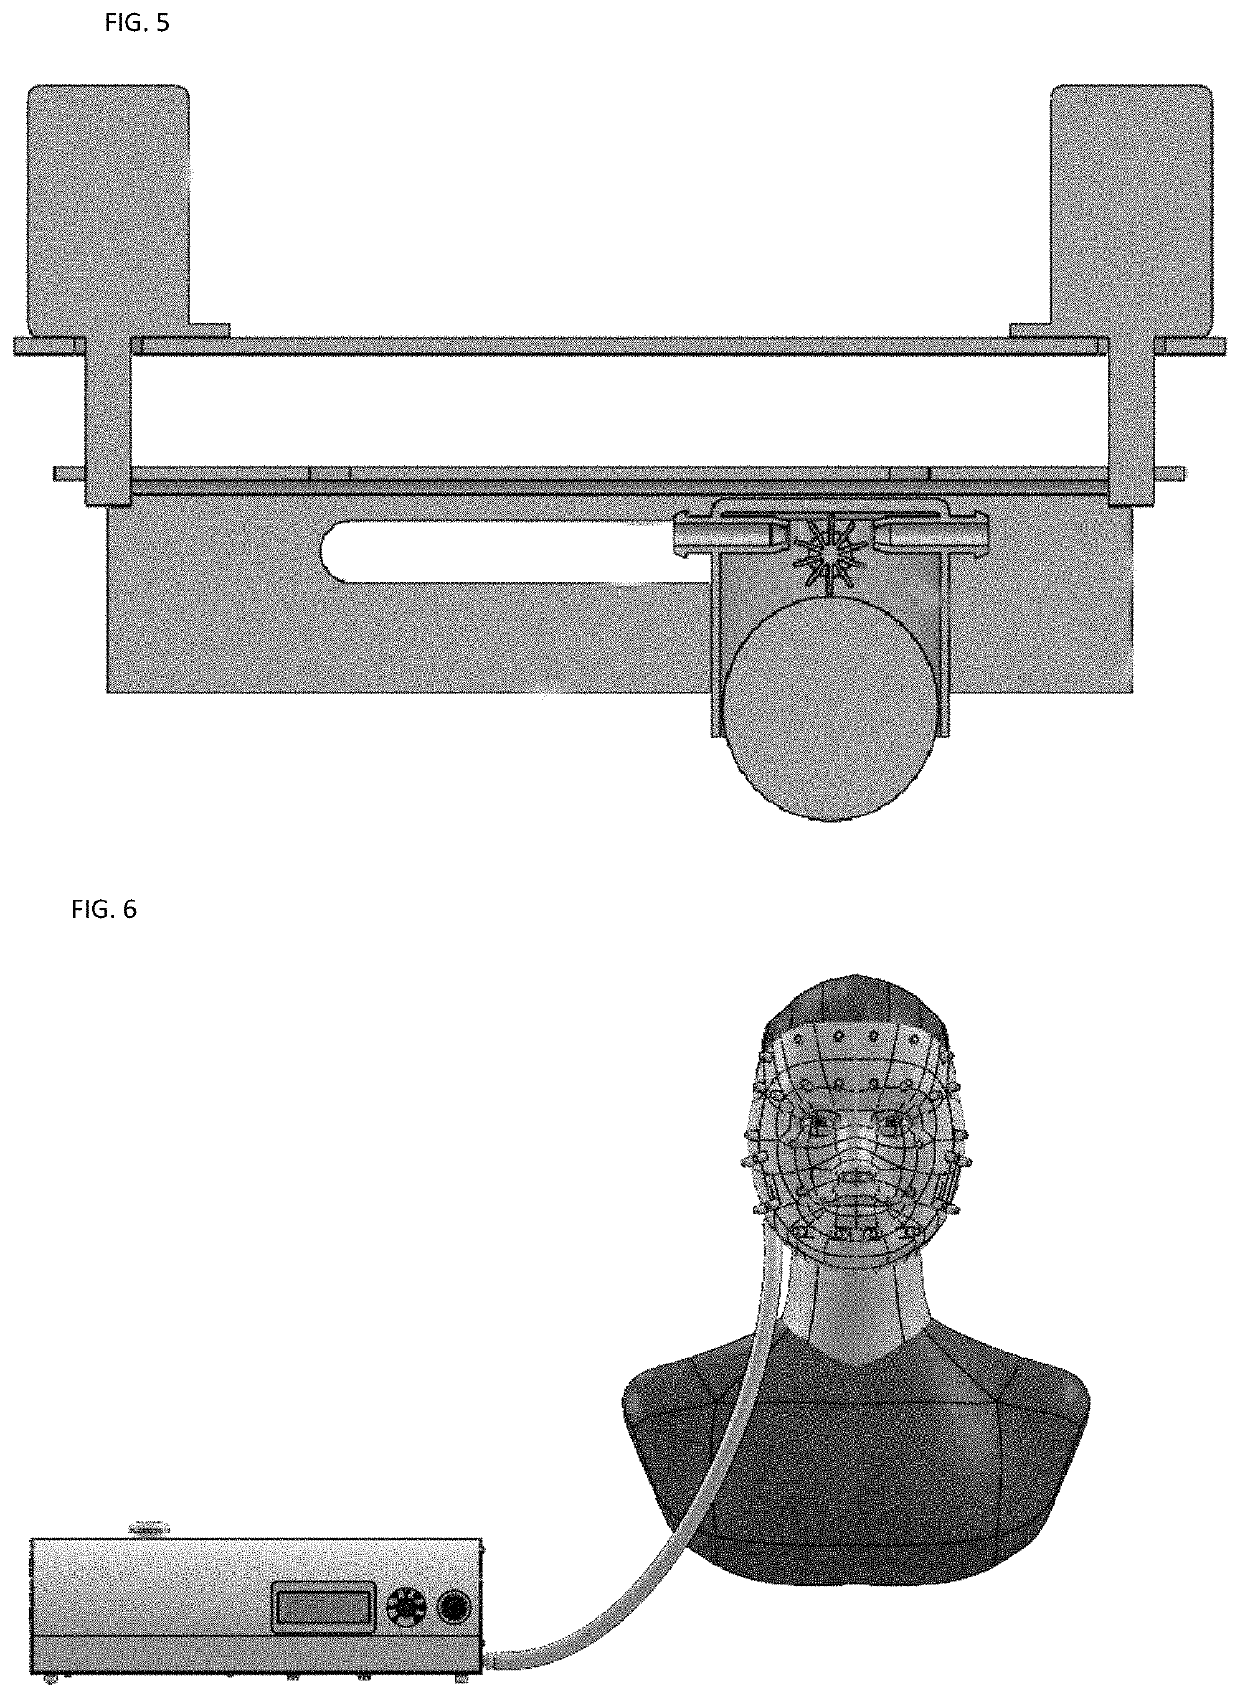 Cosmetic Massage and Liquid Distributing Neck and Facial Mask Electronic Device or Electronic Cosmetic Apparatus